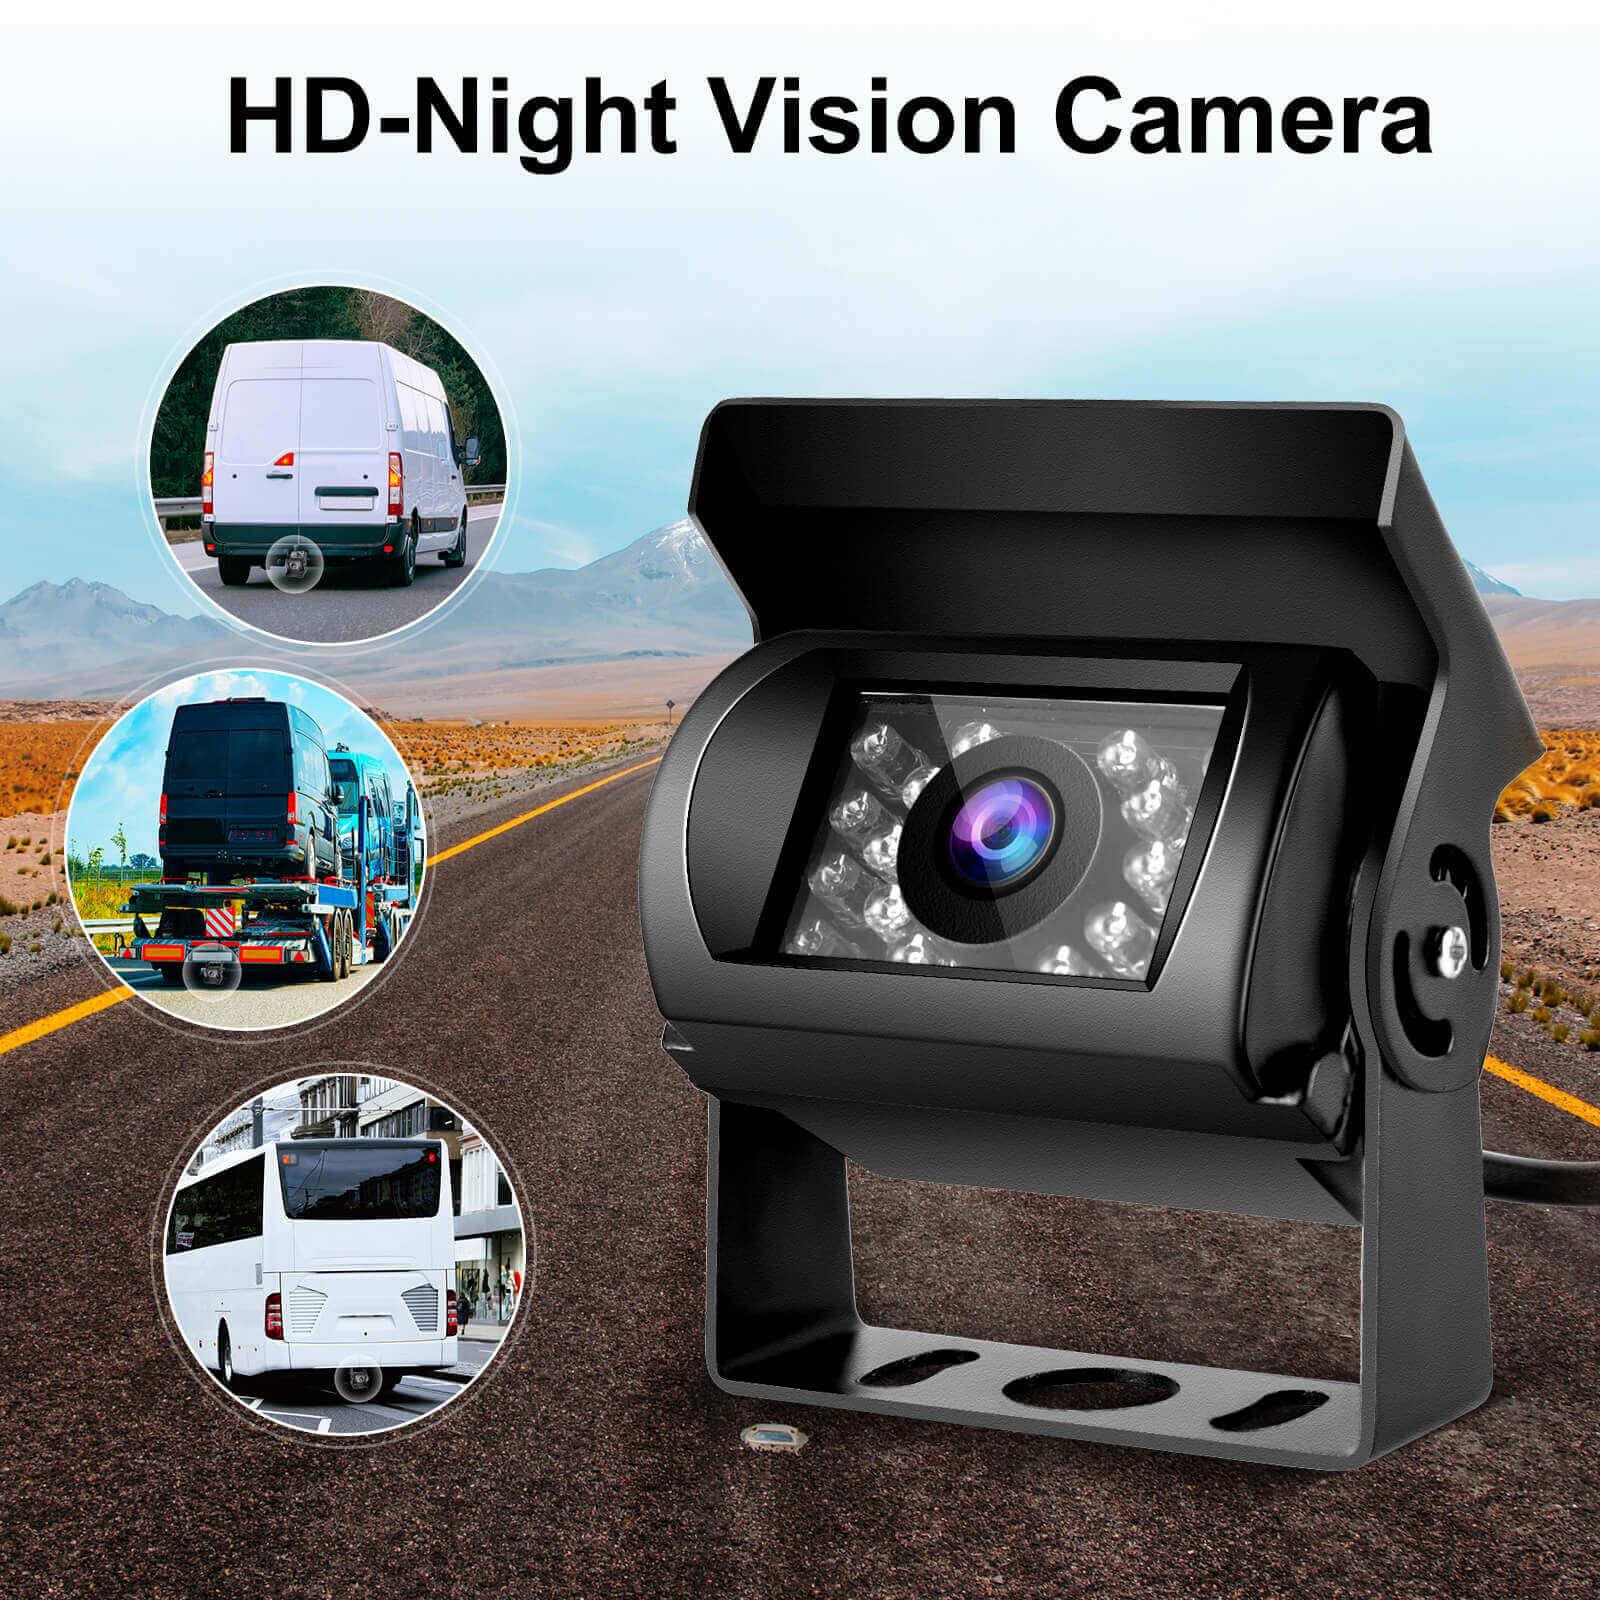 Cost-effective and Most worthwhile XGODY Back Up Camera For Truck, RV, Bus, lorry, large vehicle, 20m / 66ft HD Reverse Camera With Night Vision, Waterproof - XGODY 